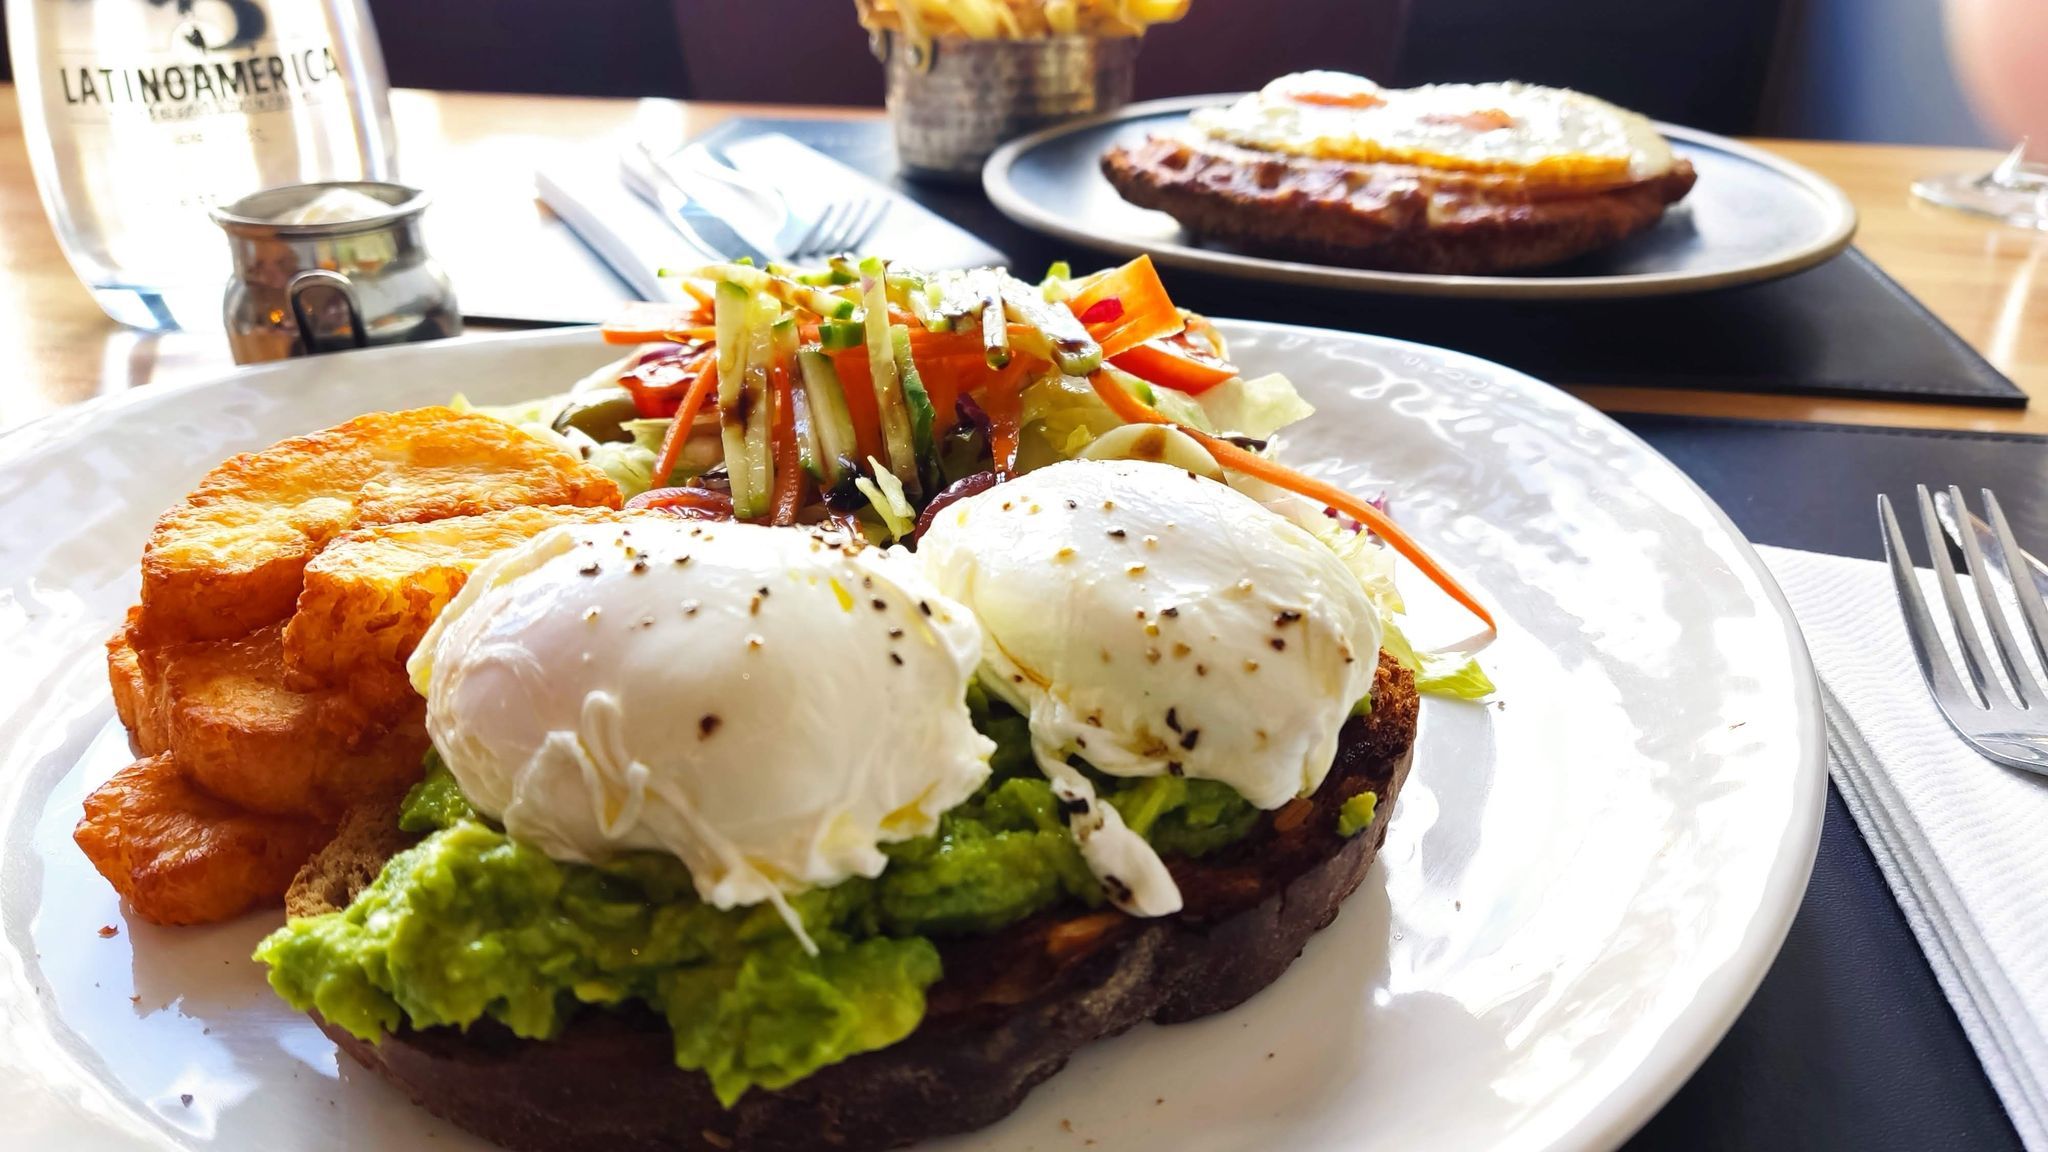 avocado on toast, topped with a beautifully gooey poached egg as a part of brunch feast menu at LatinoAmerica